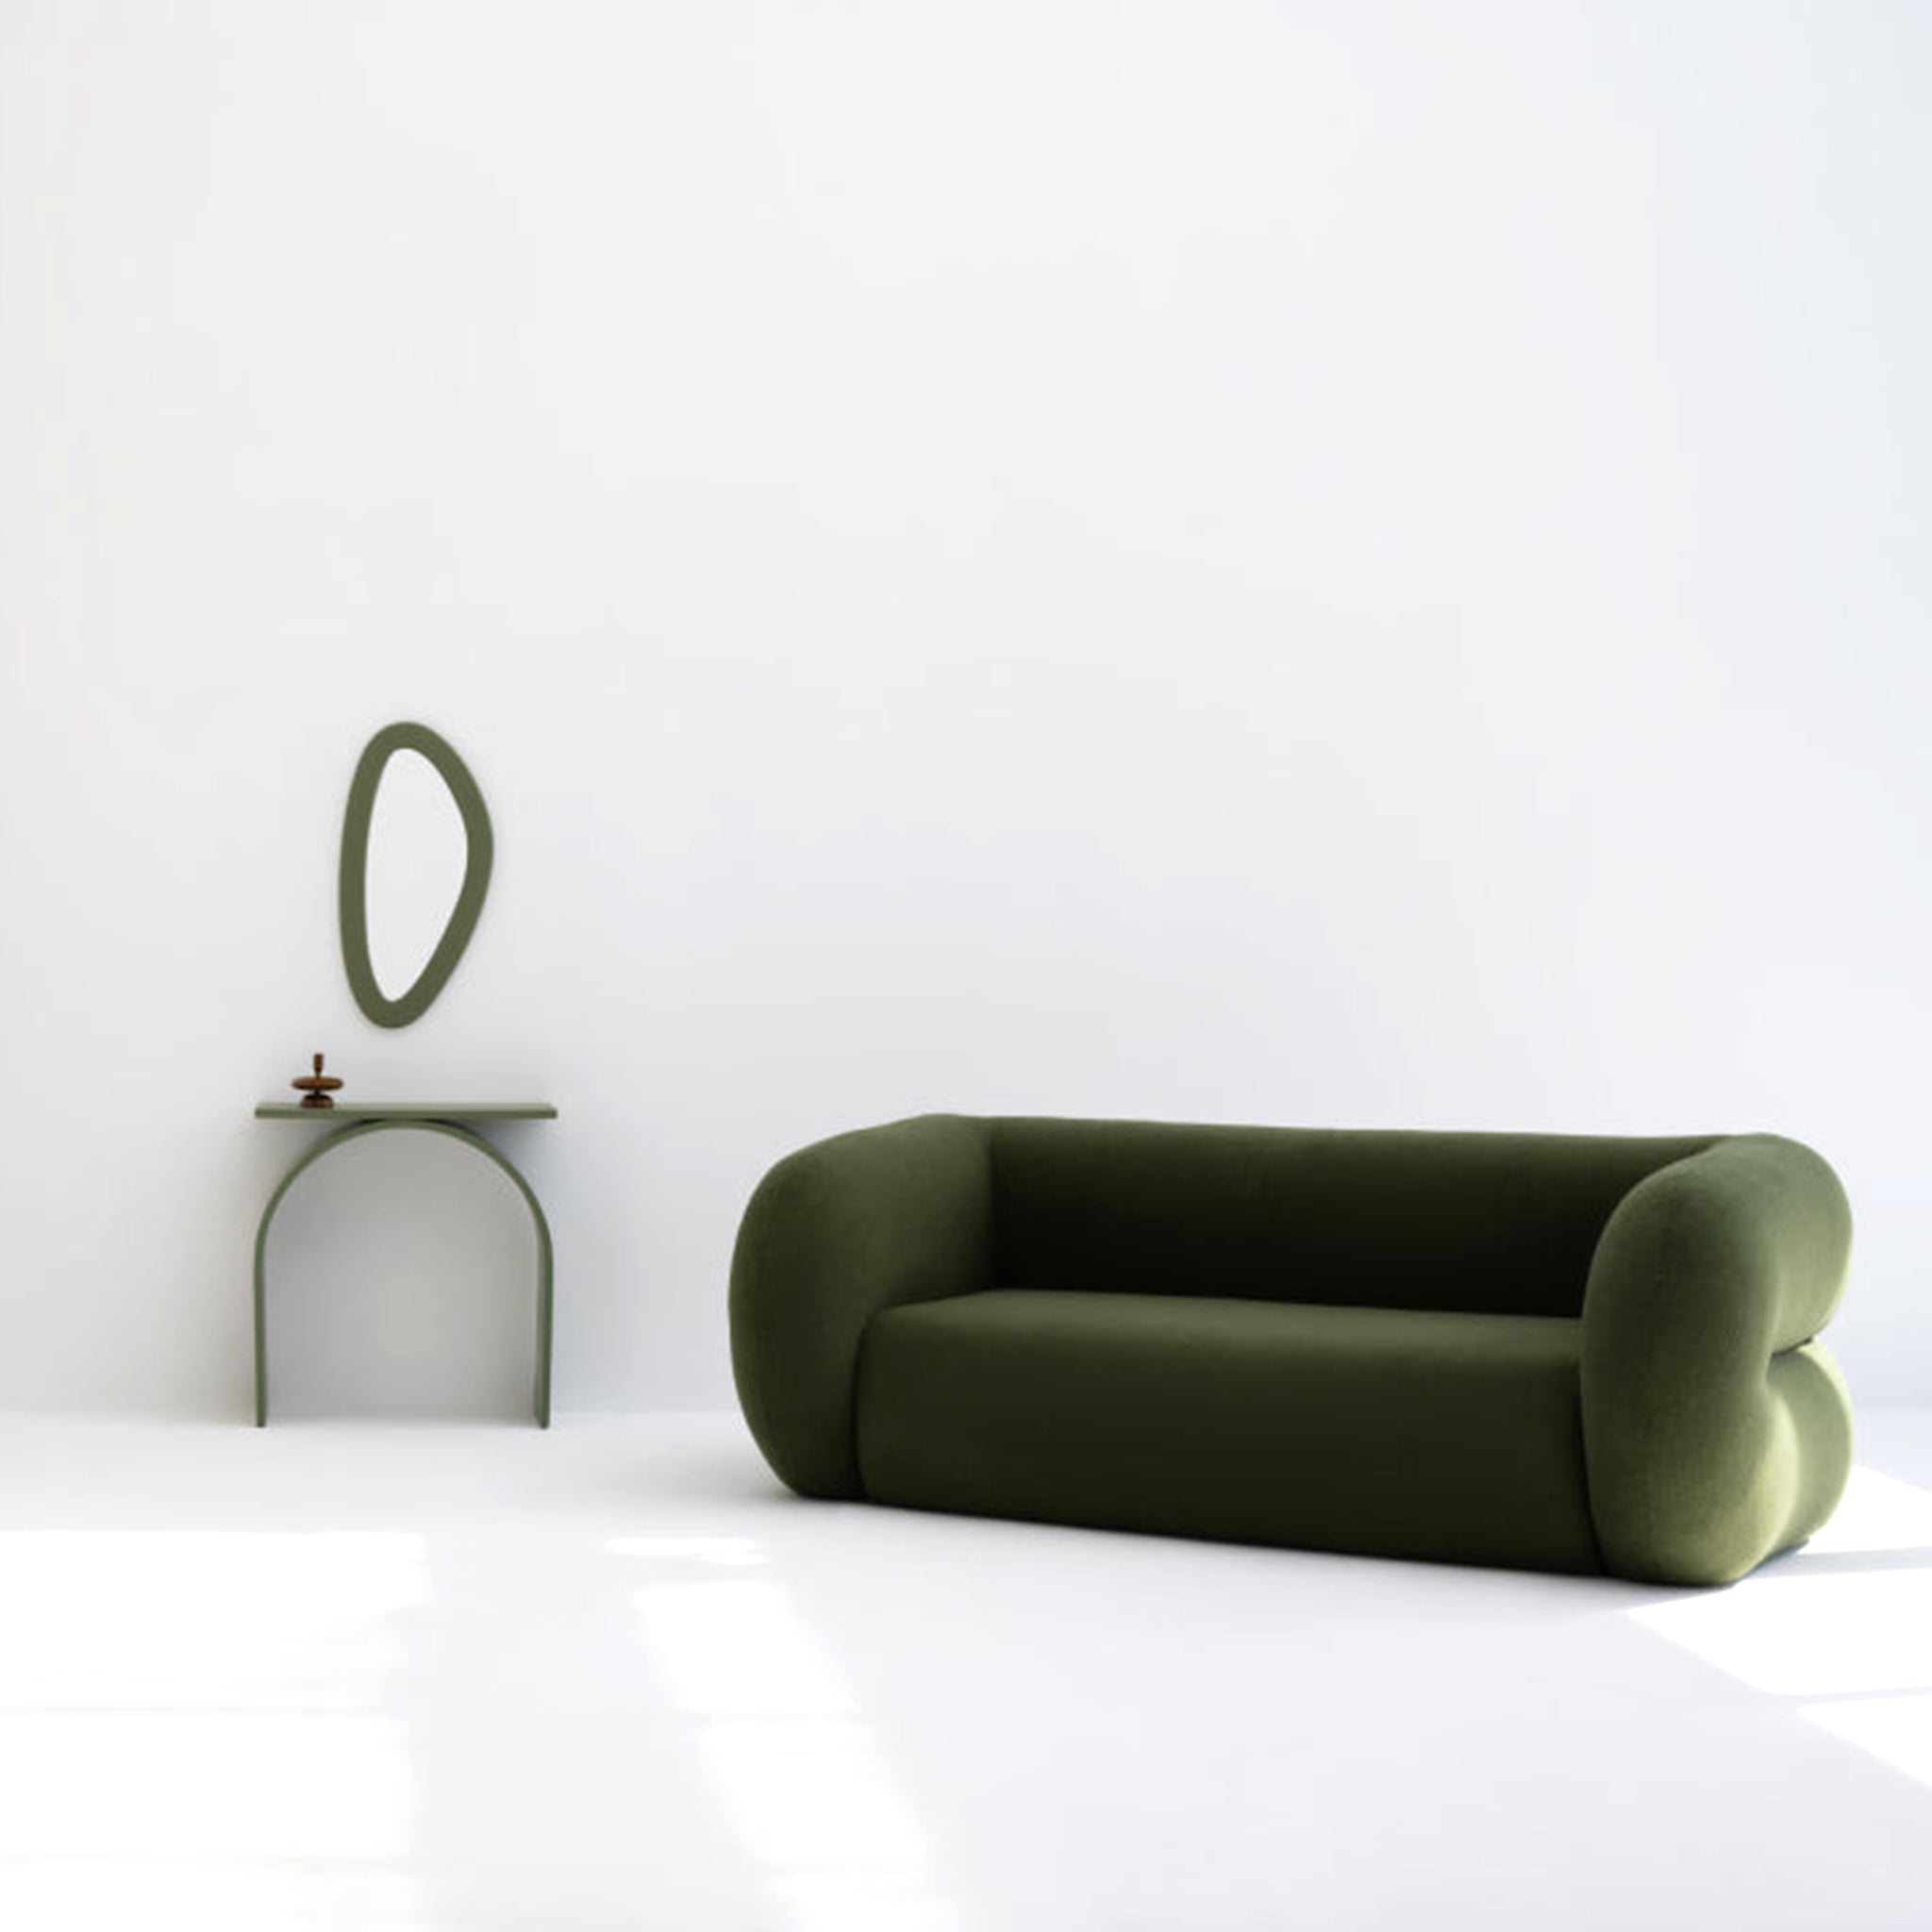 Minimalist living room with a modern green sofa featuring soft, rounded edges, accompanied by a matching side table and a unique oval mirror on a white wall.